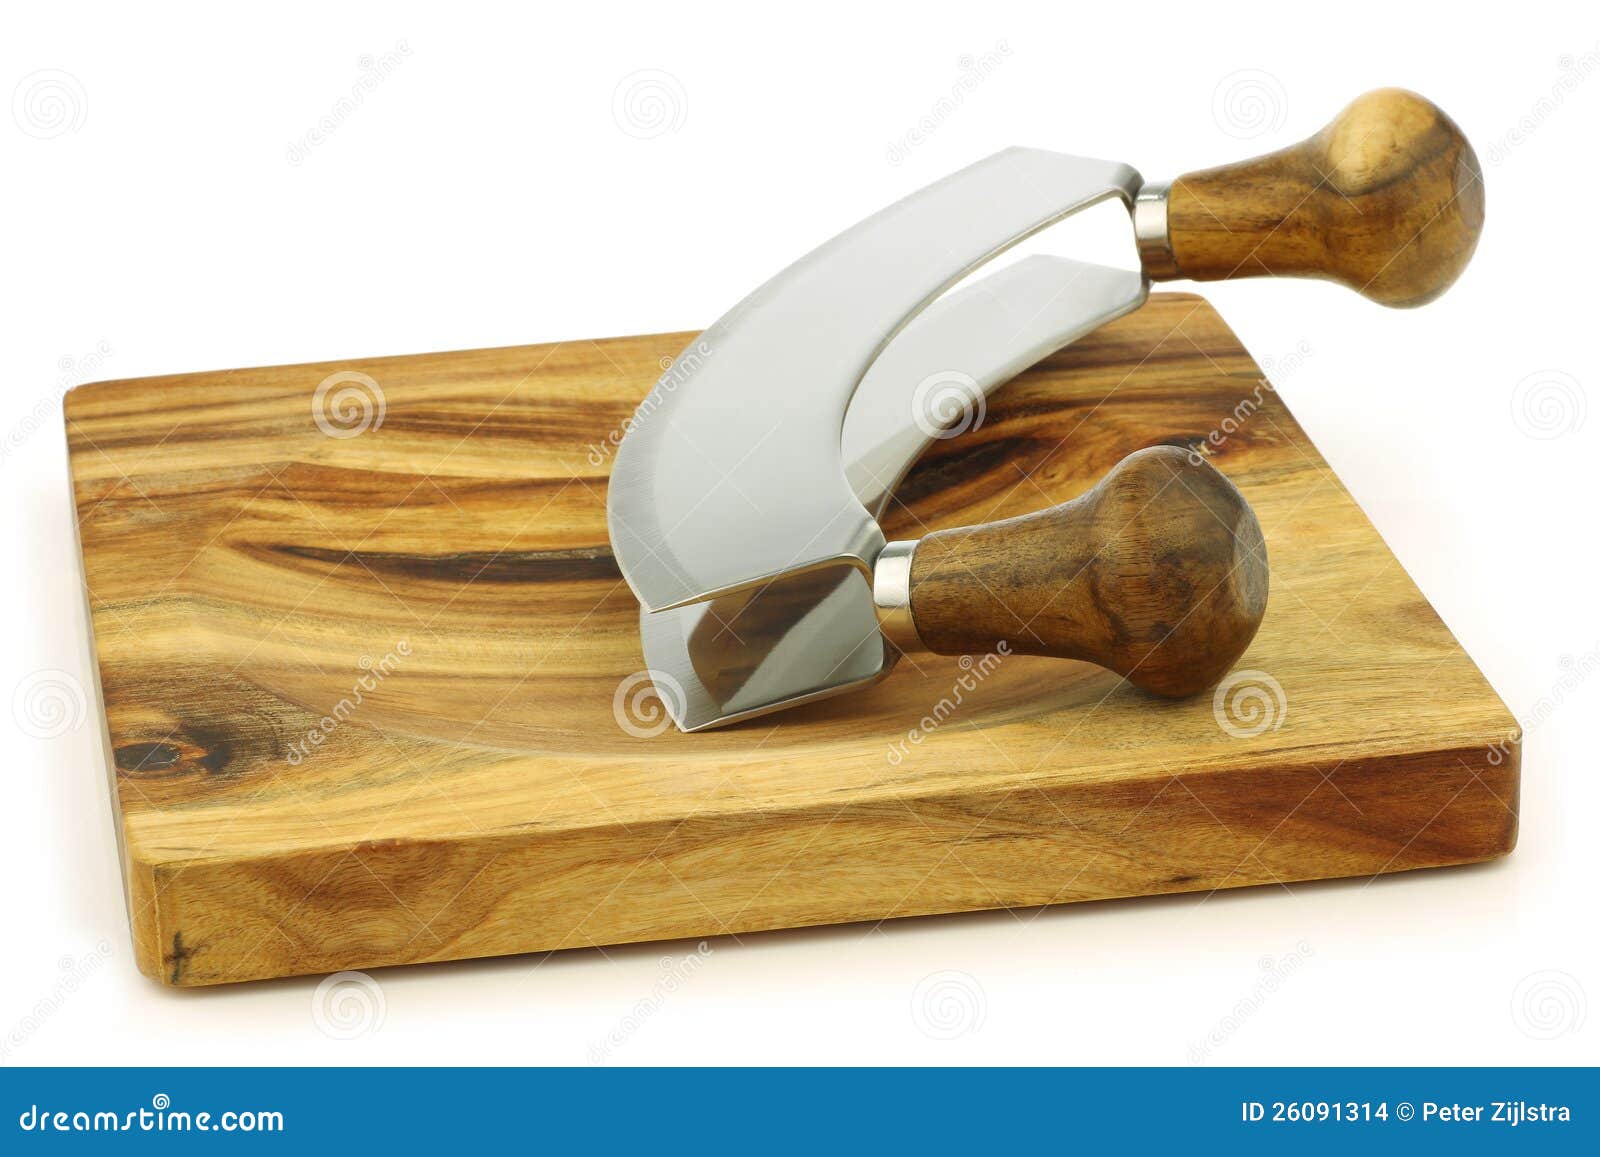  with wooden handles on a wooden cutting board on a white background